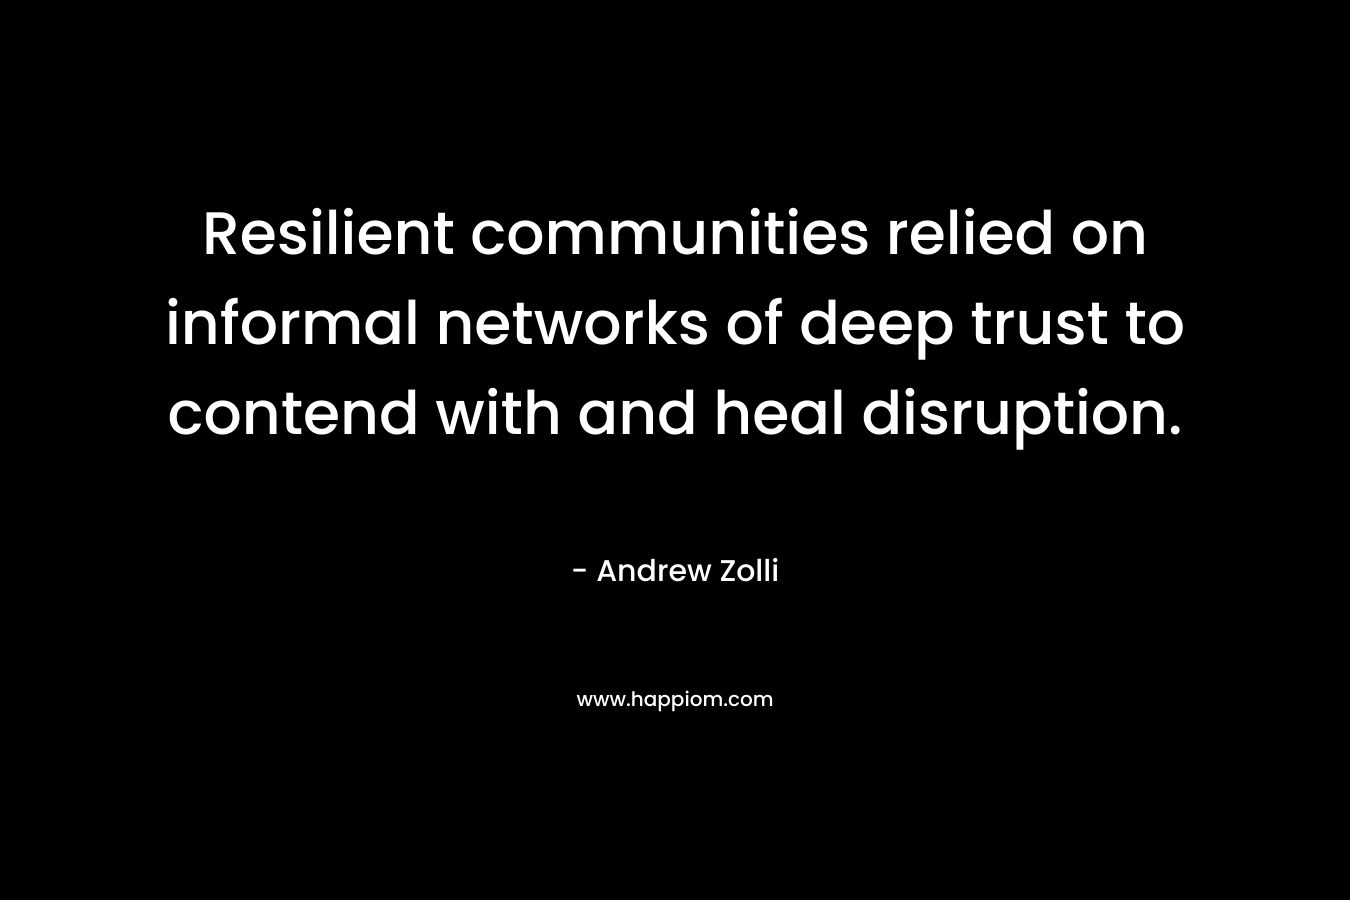 Resilient communities relied on informal networks of deep trust to contend with and heal disruption.